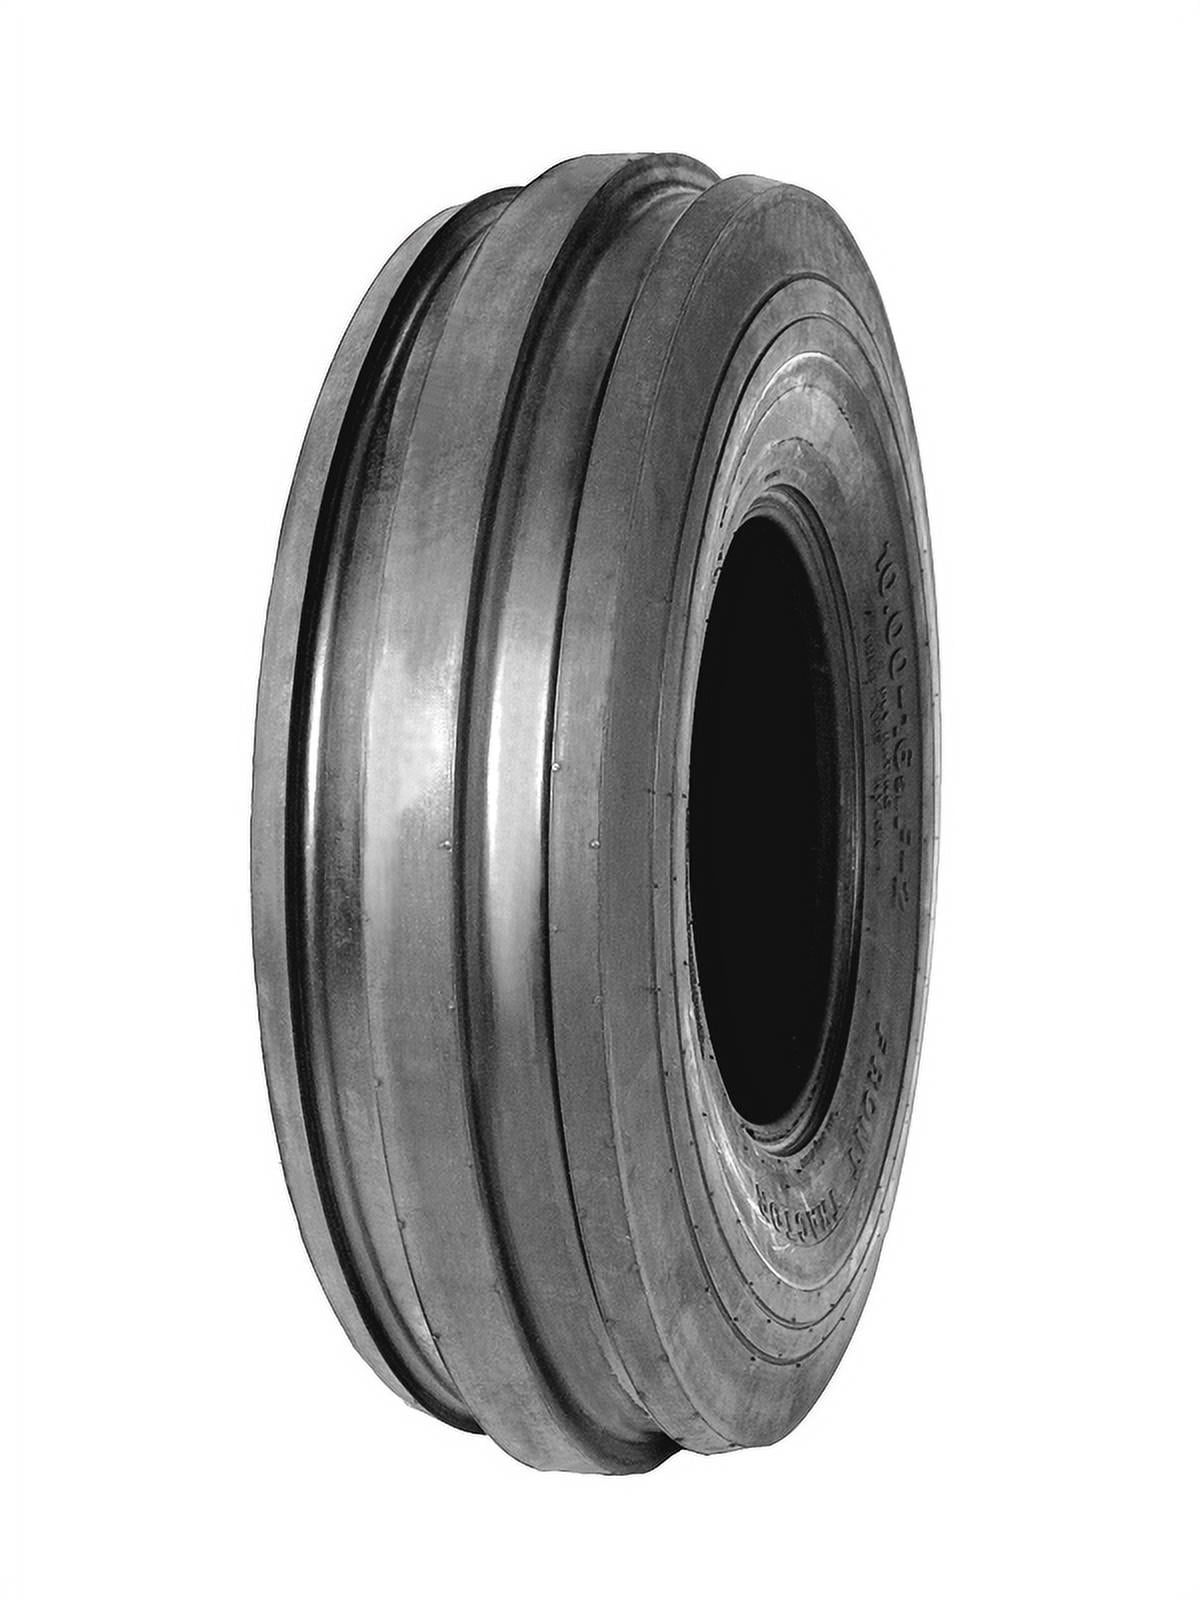 Triple Rib Front Tractor Tire Set of 2 500X15 5.00X15 500-15 With Tubes 